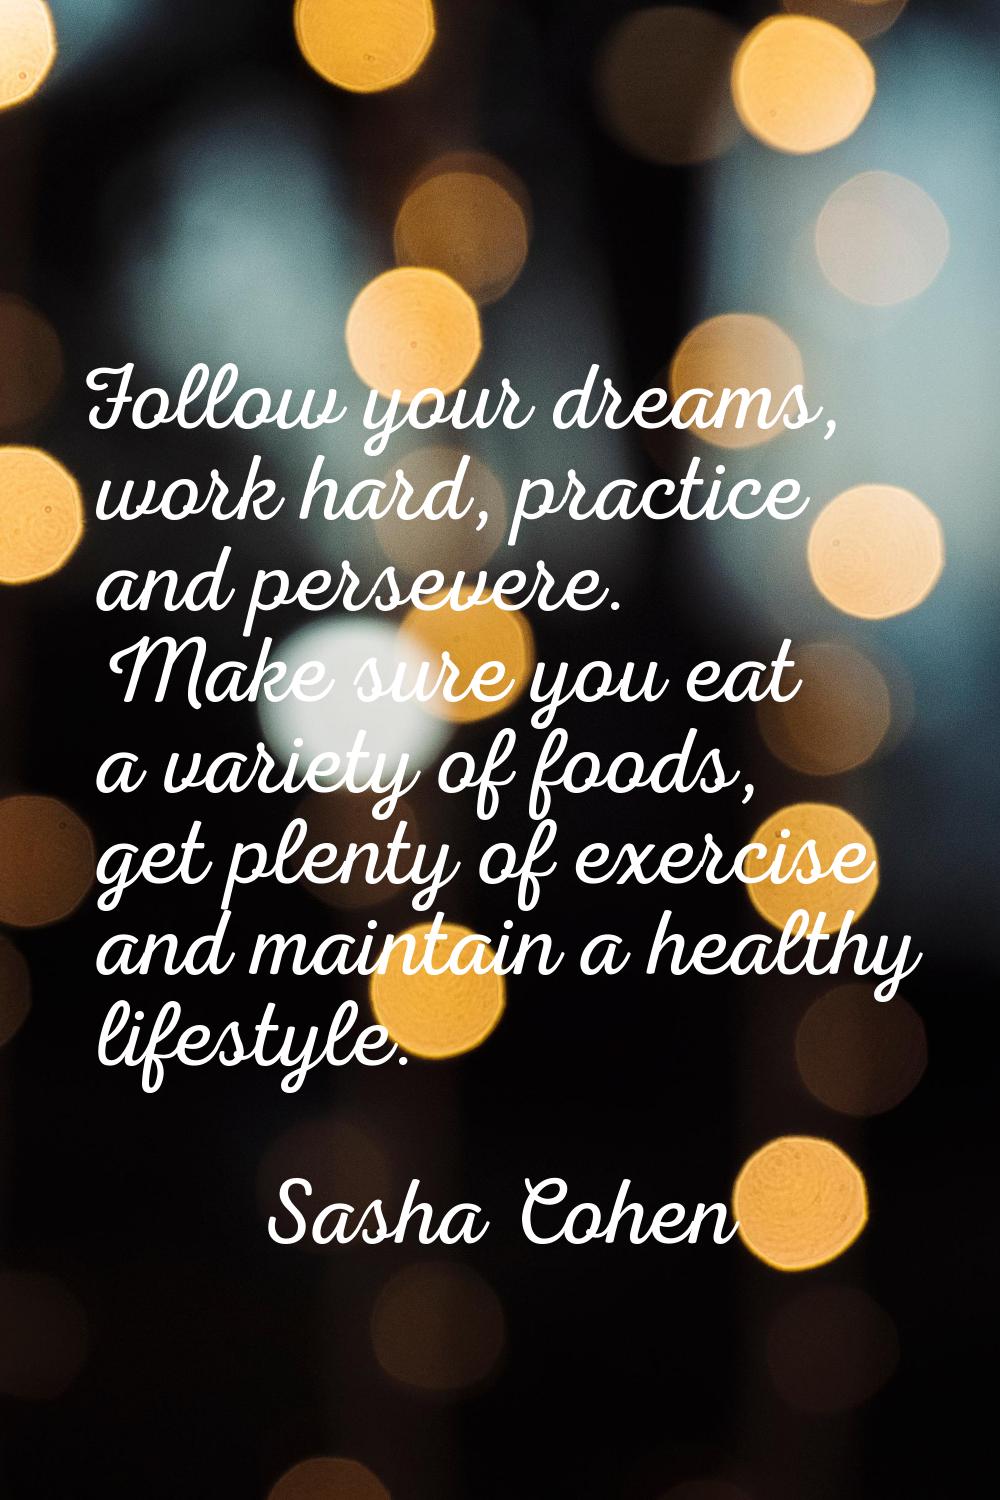 Follow your dreams, work hard, practice and persevere. Make sure you eat a variety of foods, get pl